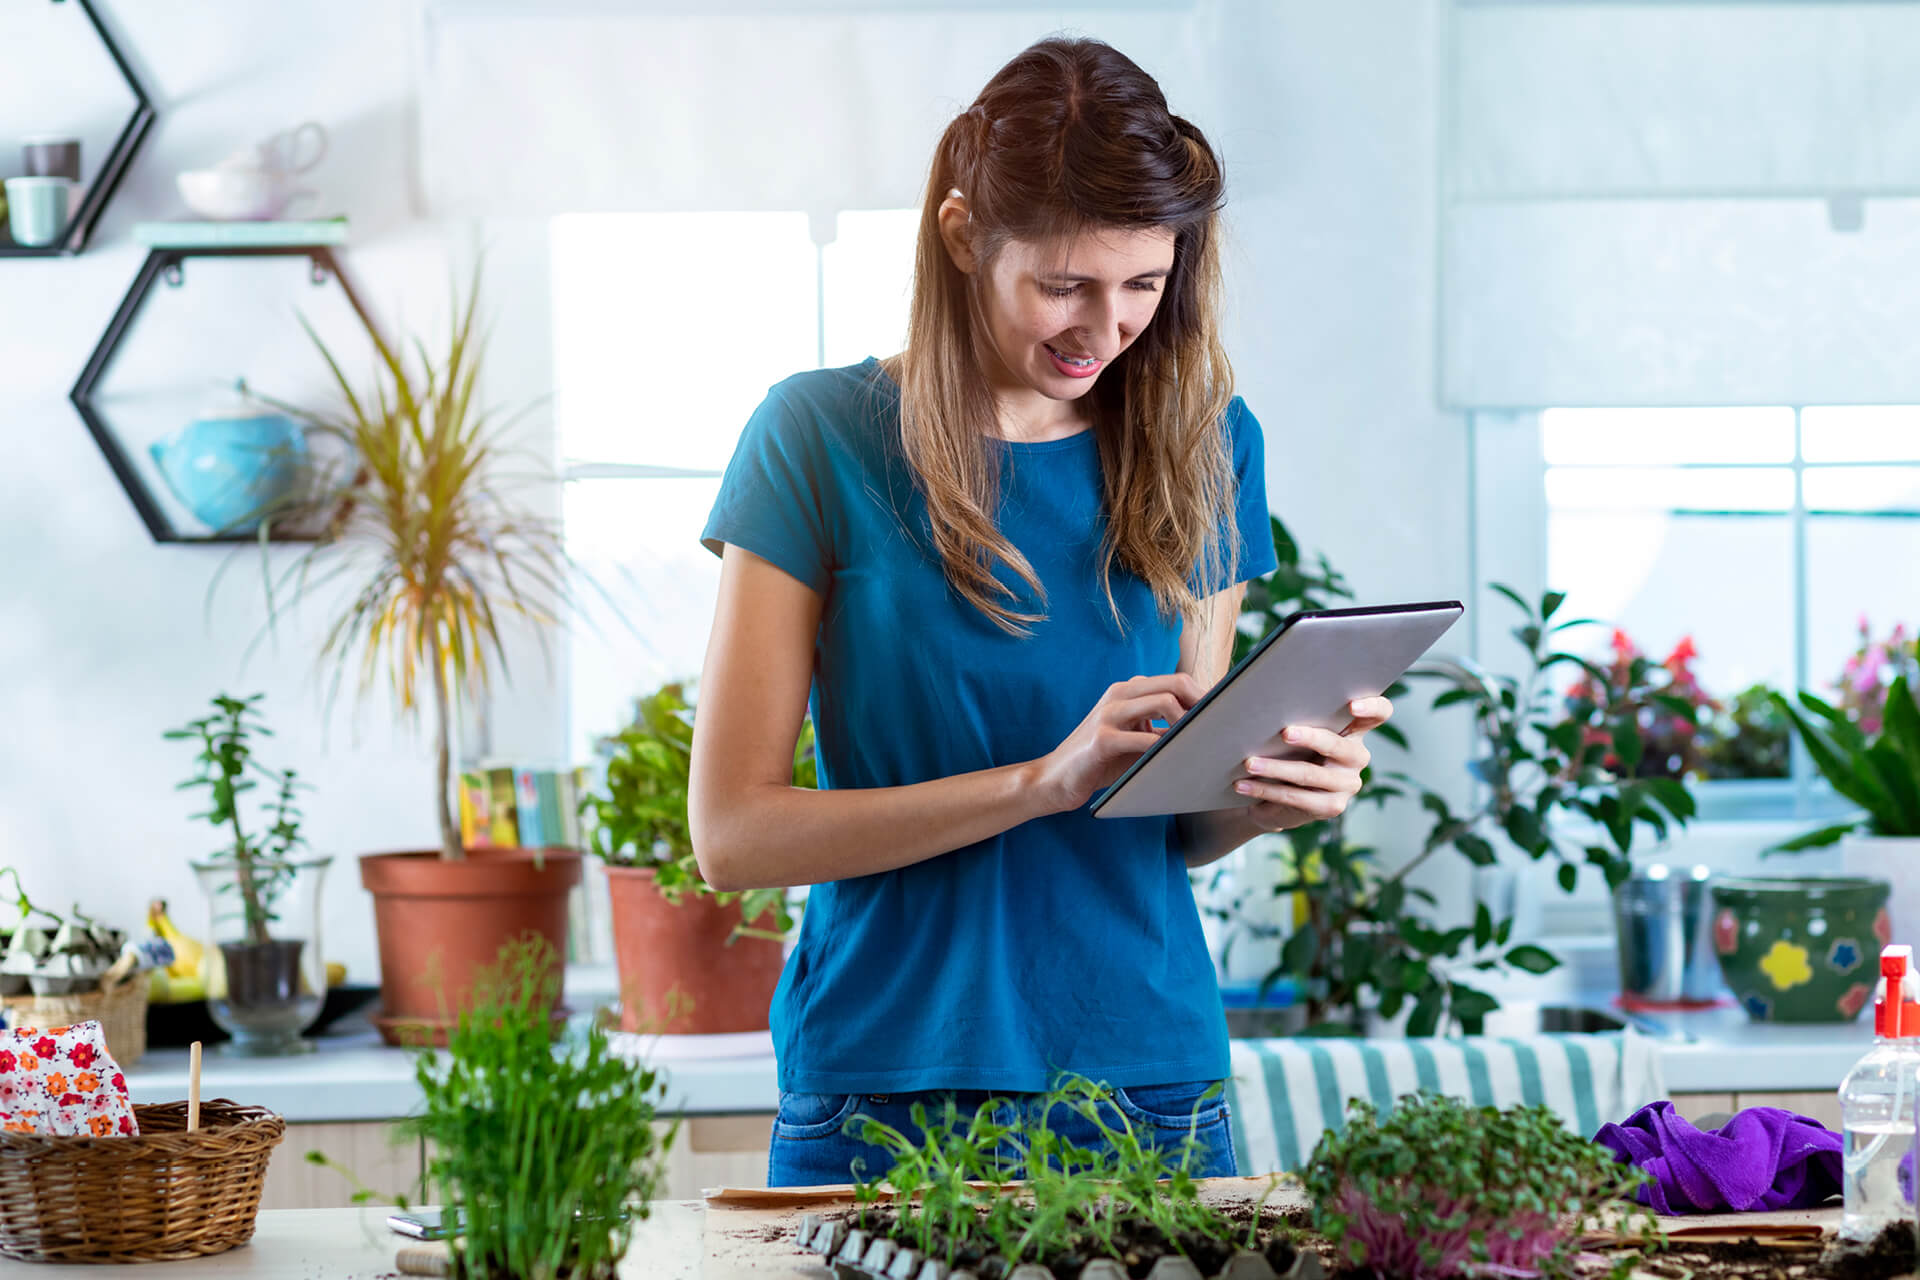 A woman in a florist shop surrounded by plants and flowers reads from a tablet.